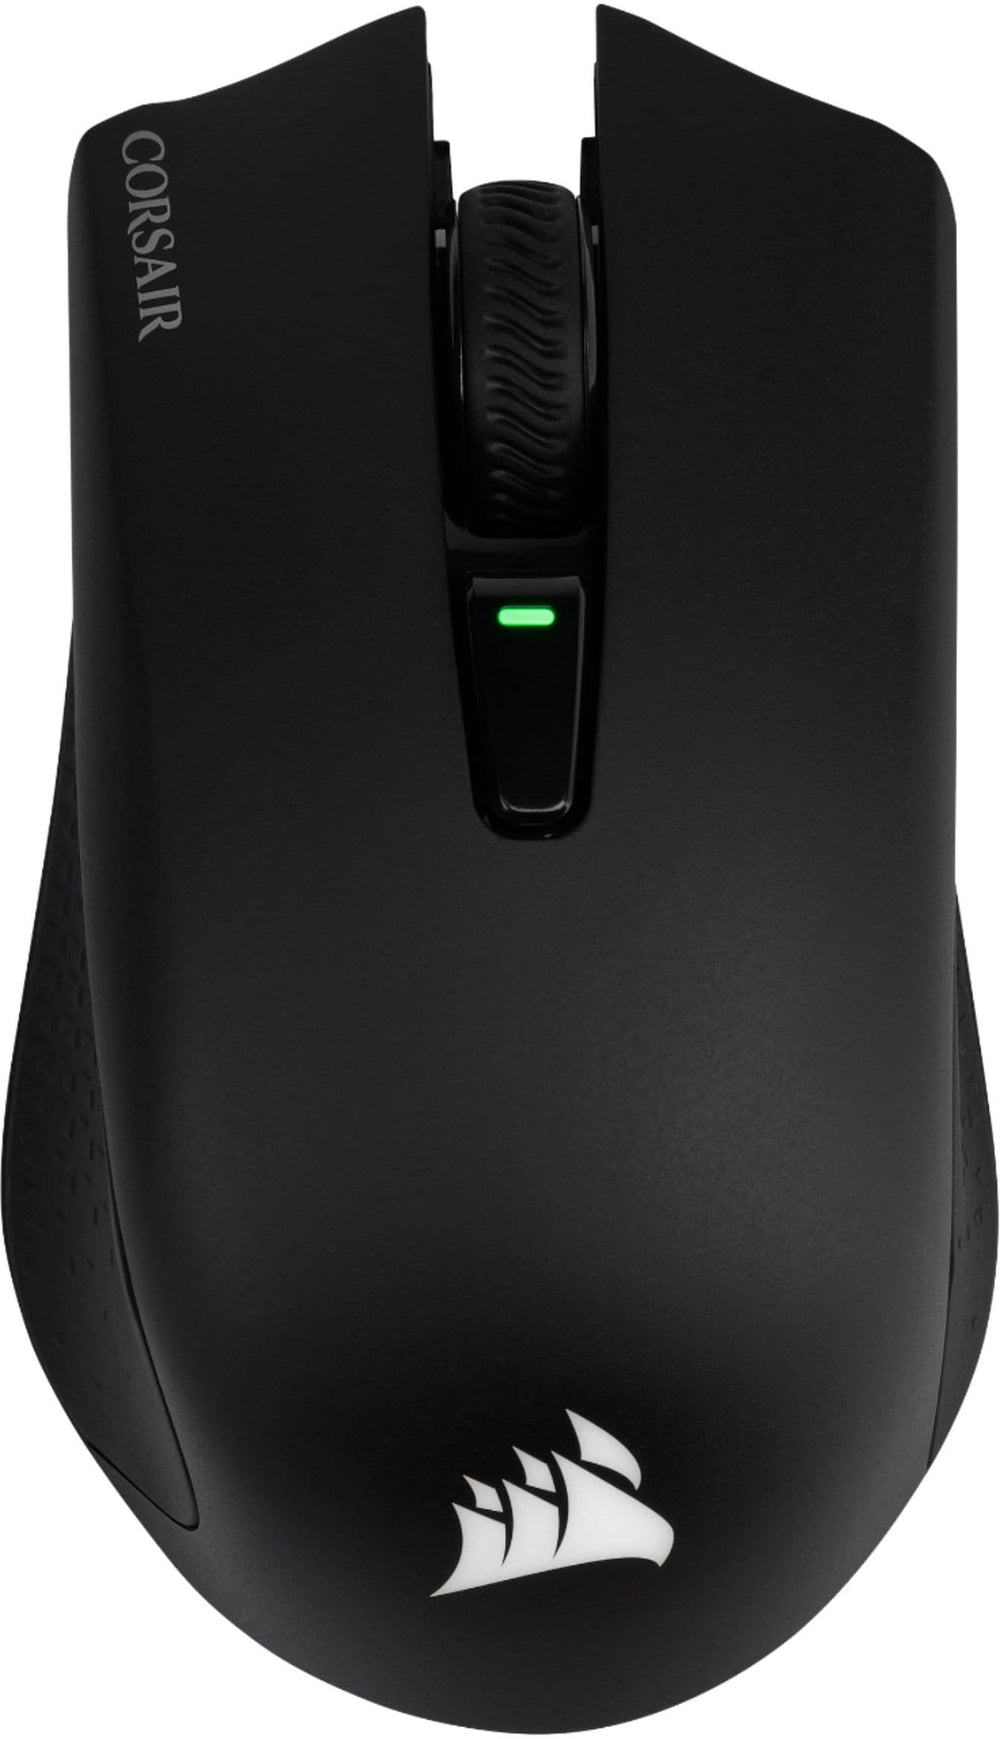 CORSAIR - HARPOON RGB Wireless Optical Gaming Mouse with Bluetooth - Black_1